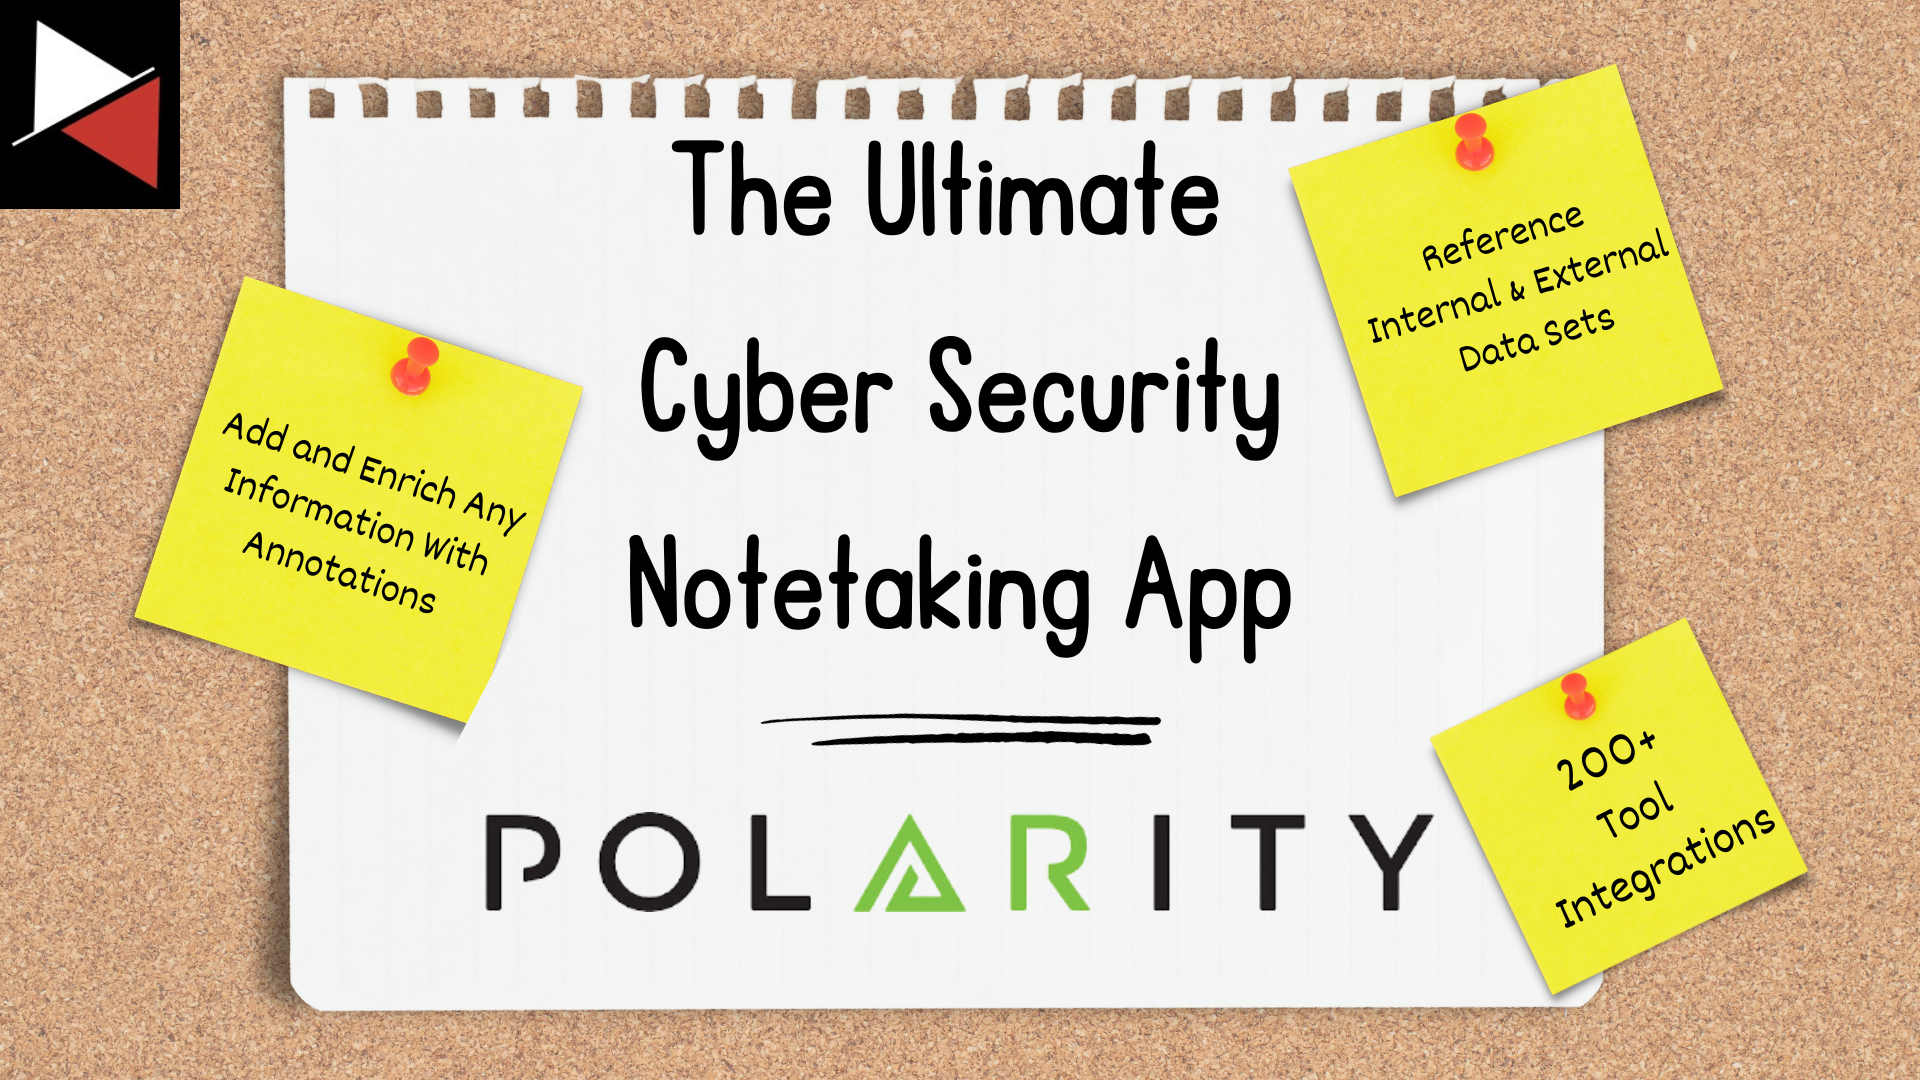 Discover the Ultimate Cyber Security Notetaking App: Polarity